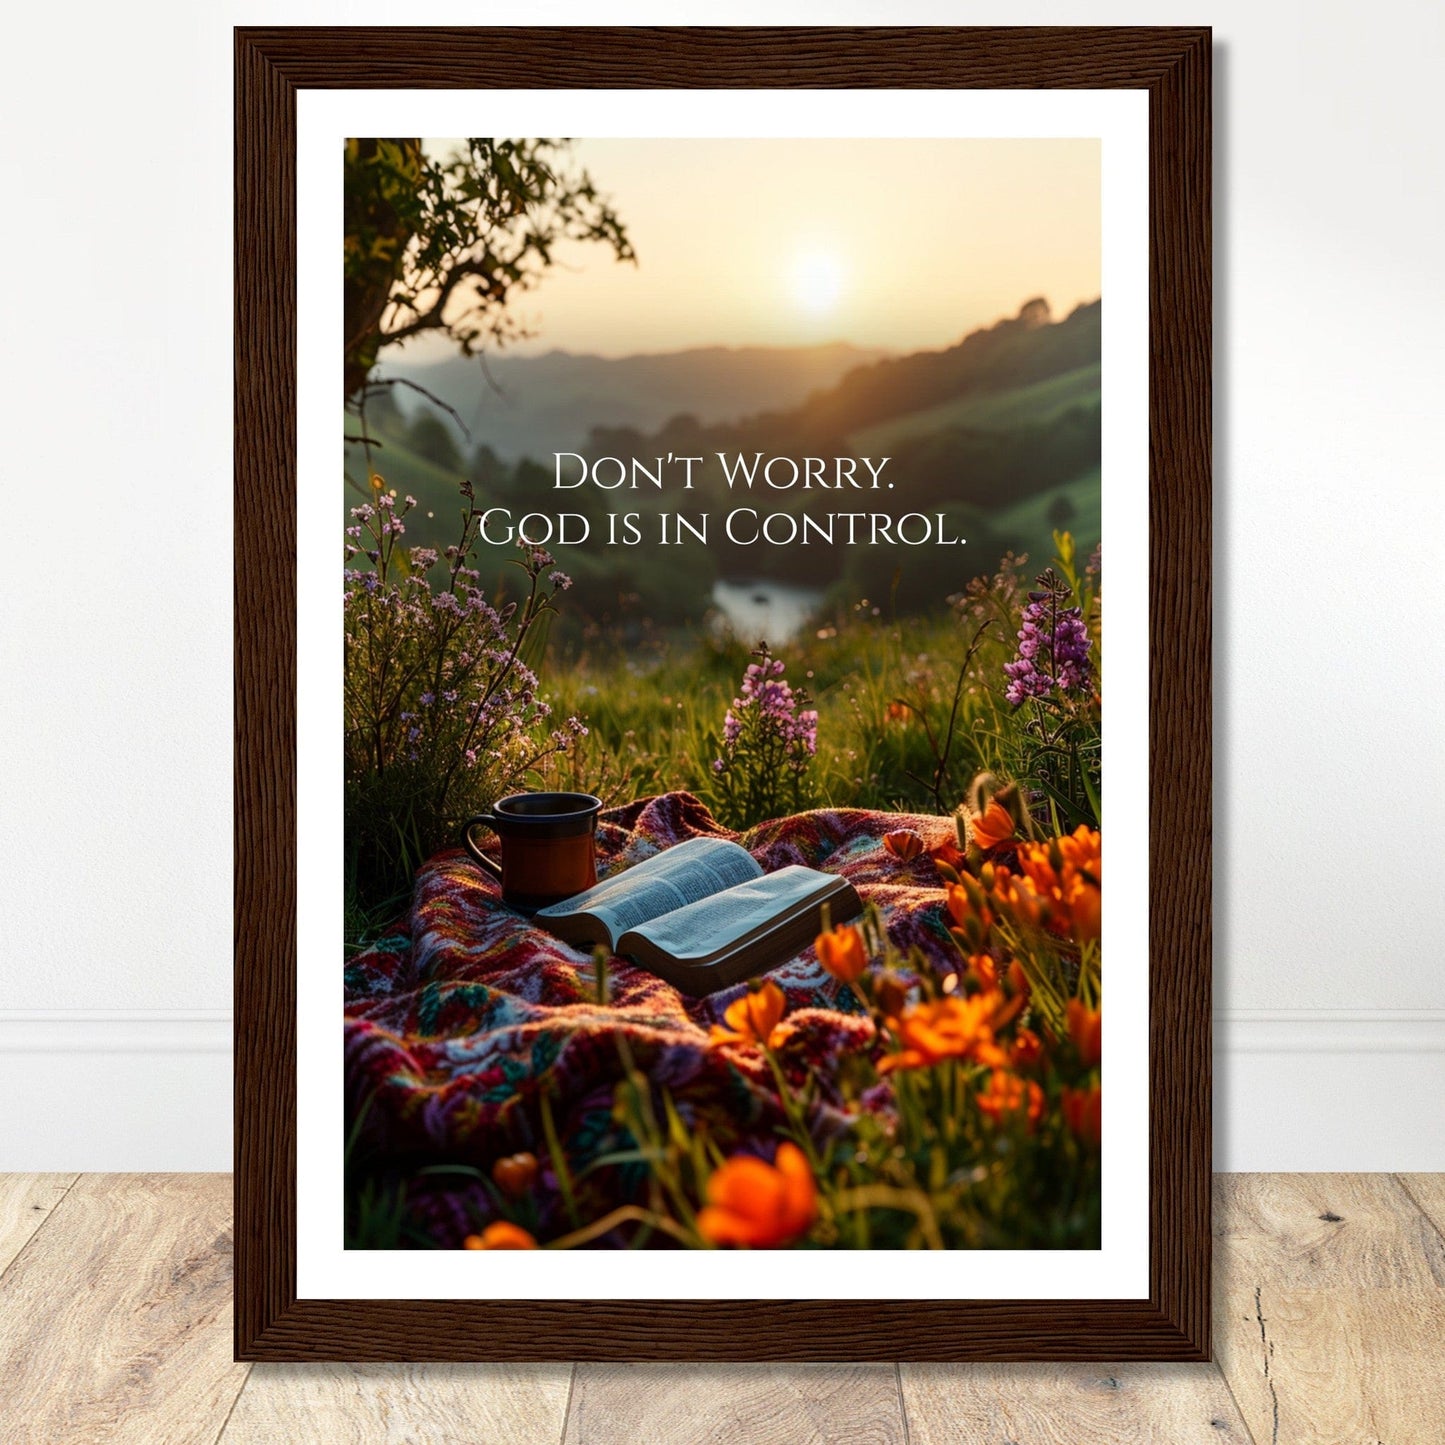 Coffee With My Father Print Material A4 21x29.7 cm / 8x12″ / Dark wood frame Premium Matte Paper Wooden Framed Poster